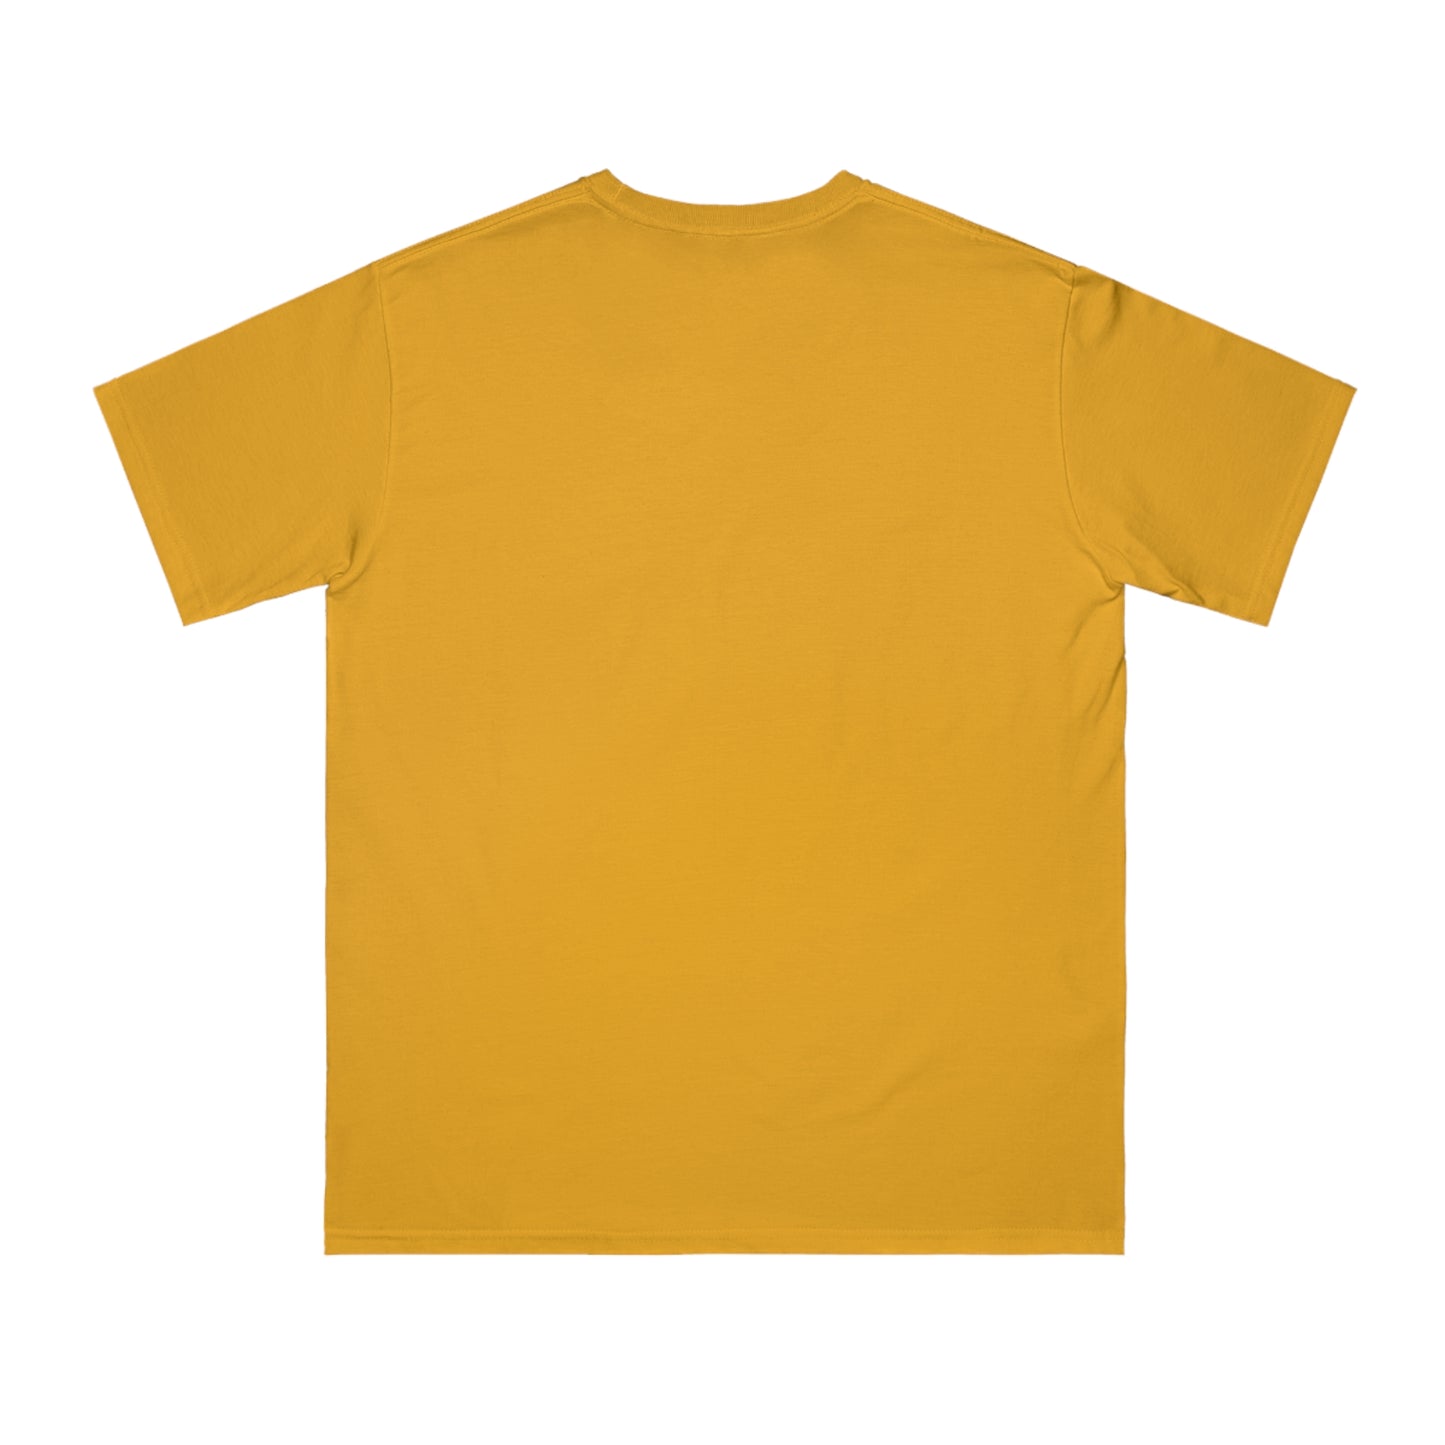 a yellow t - shirt on a white background